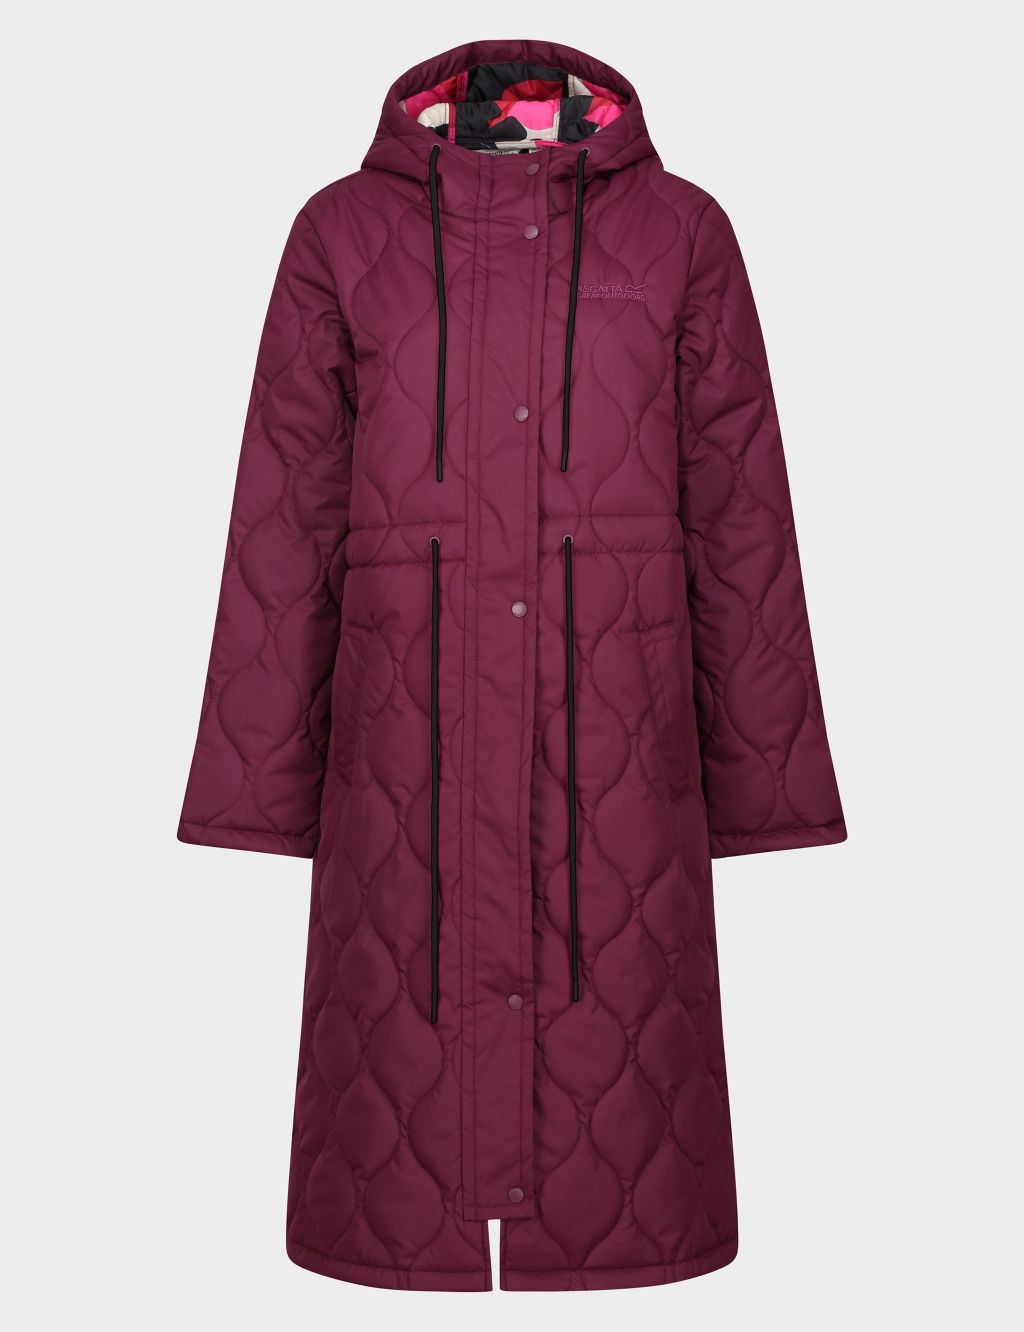 Orla Kiely Quilted Longline Coat image 2